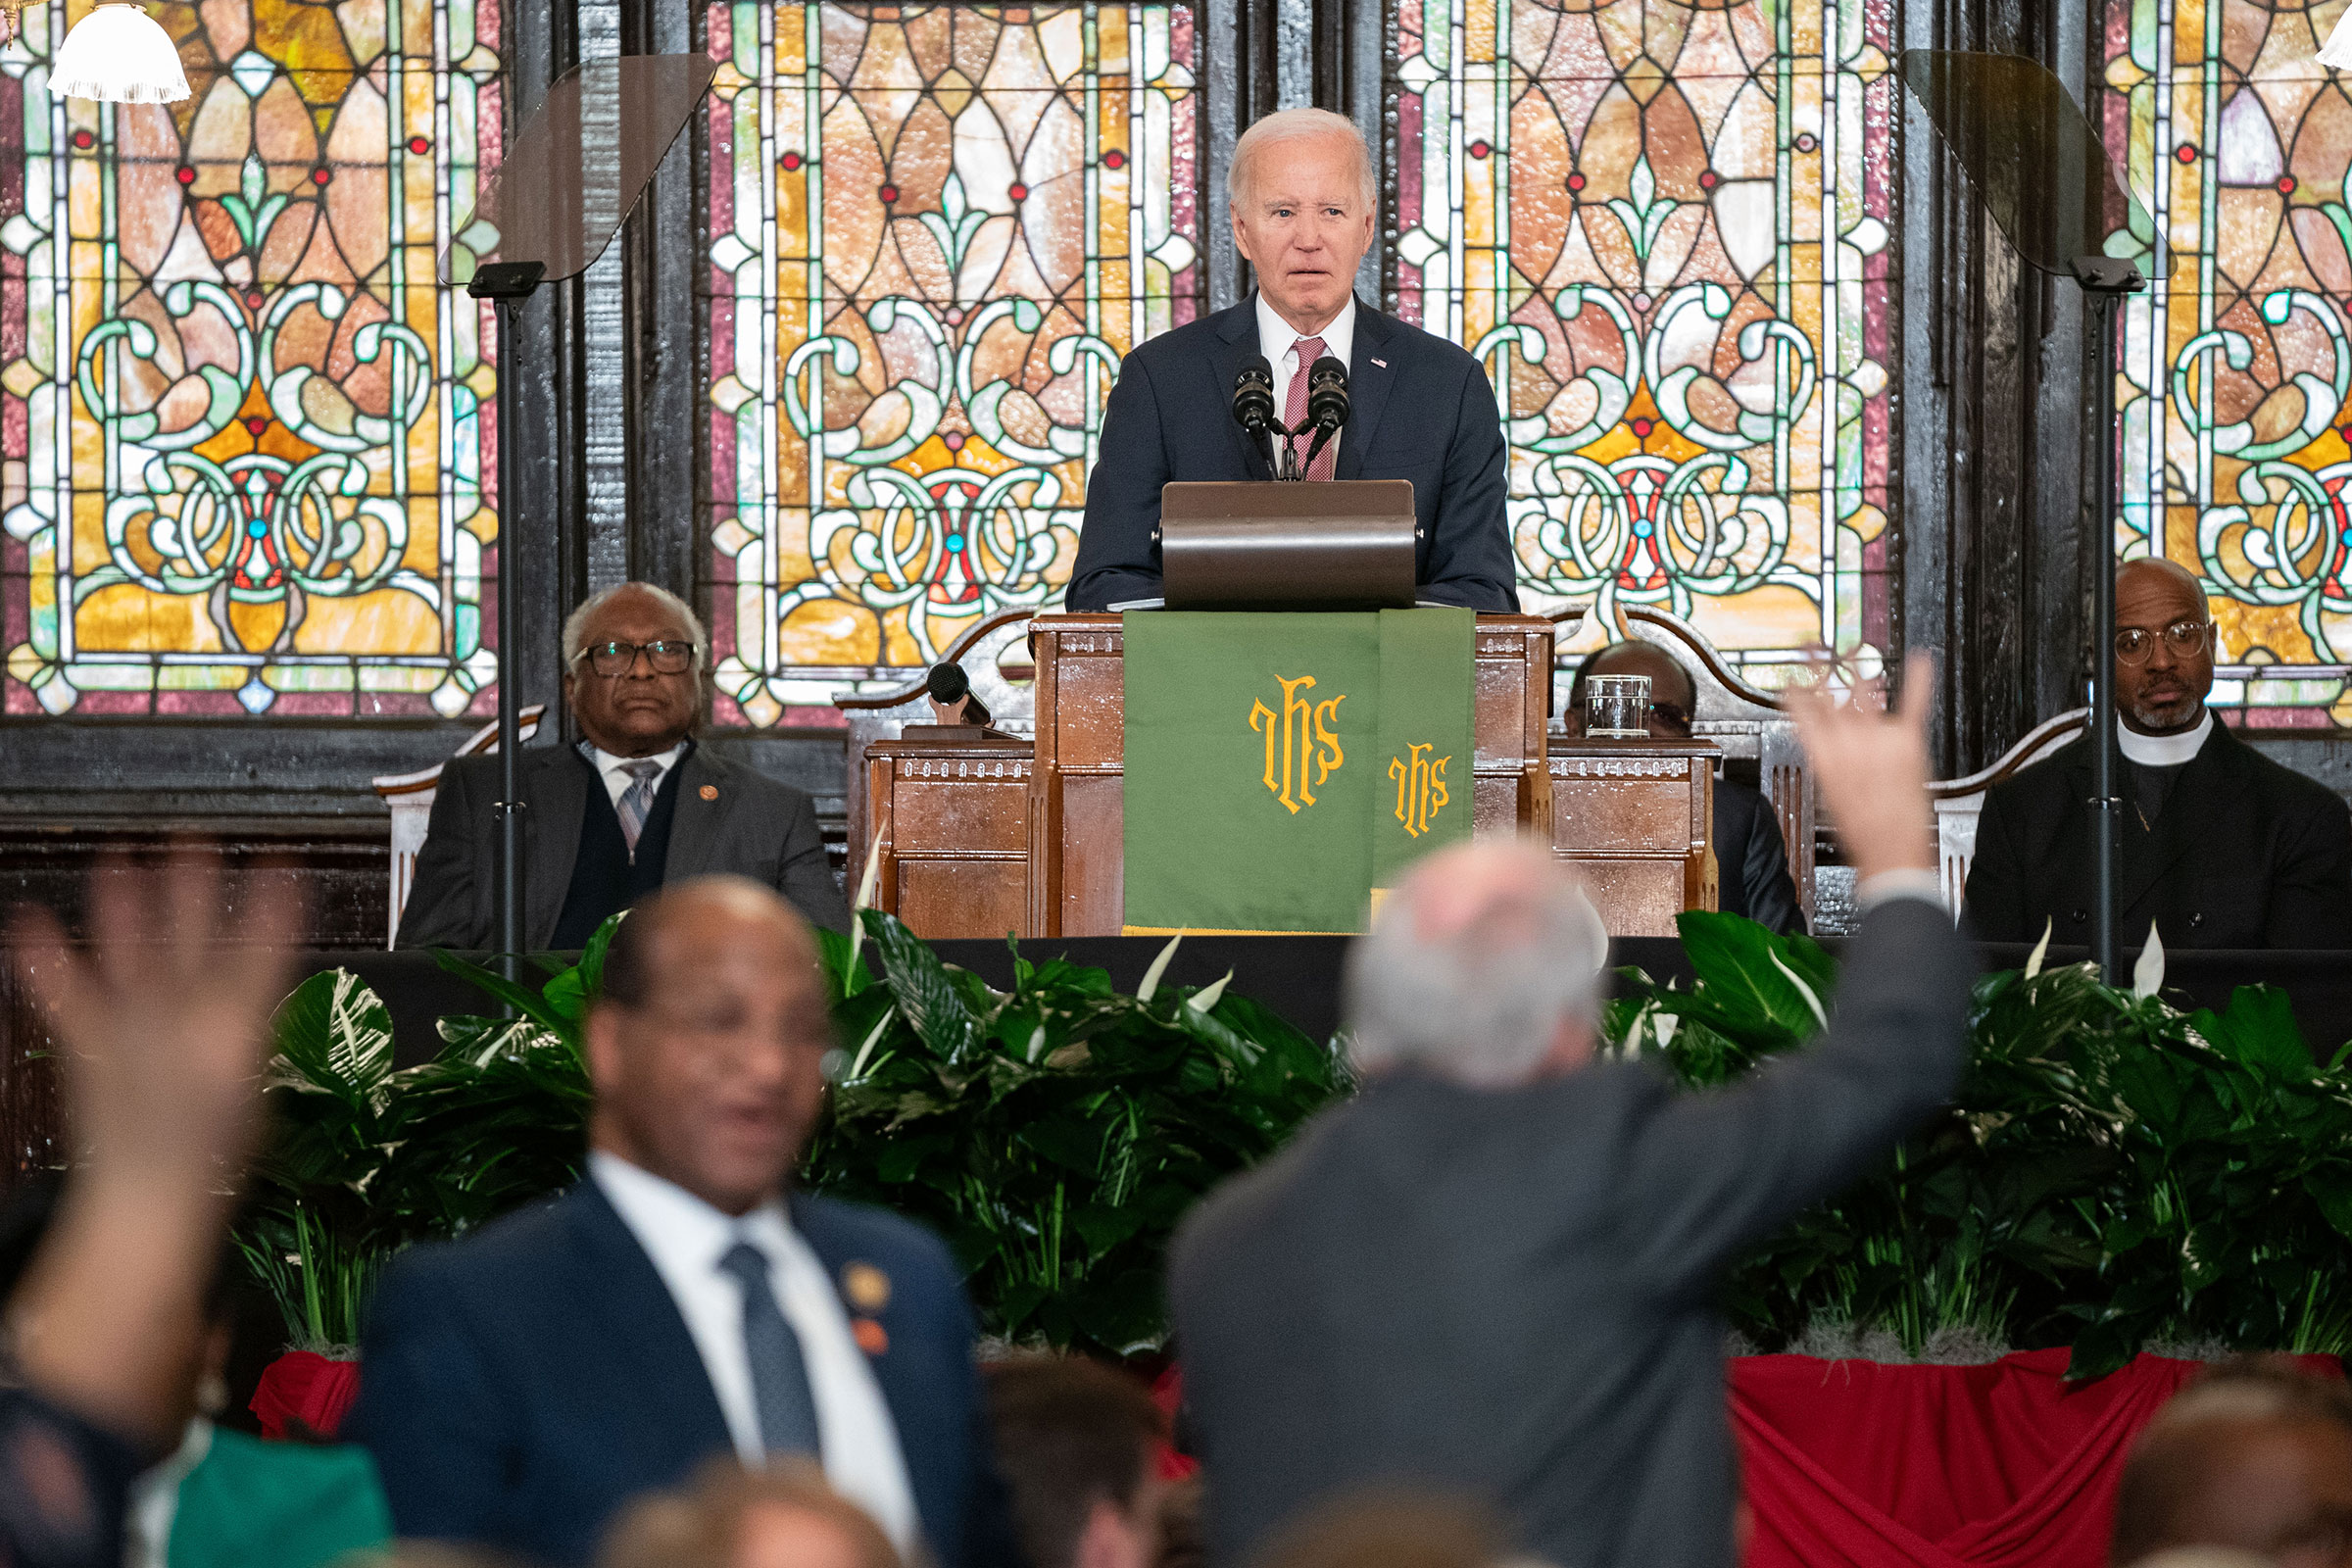 President Joe Biden watches as protestors are escorted out of the building during a campaign event at Emanuel AME Church on January 8, in Charleston, South Carolina. 